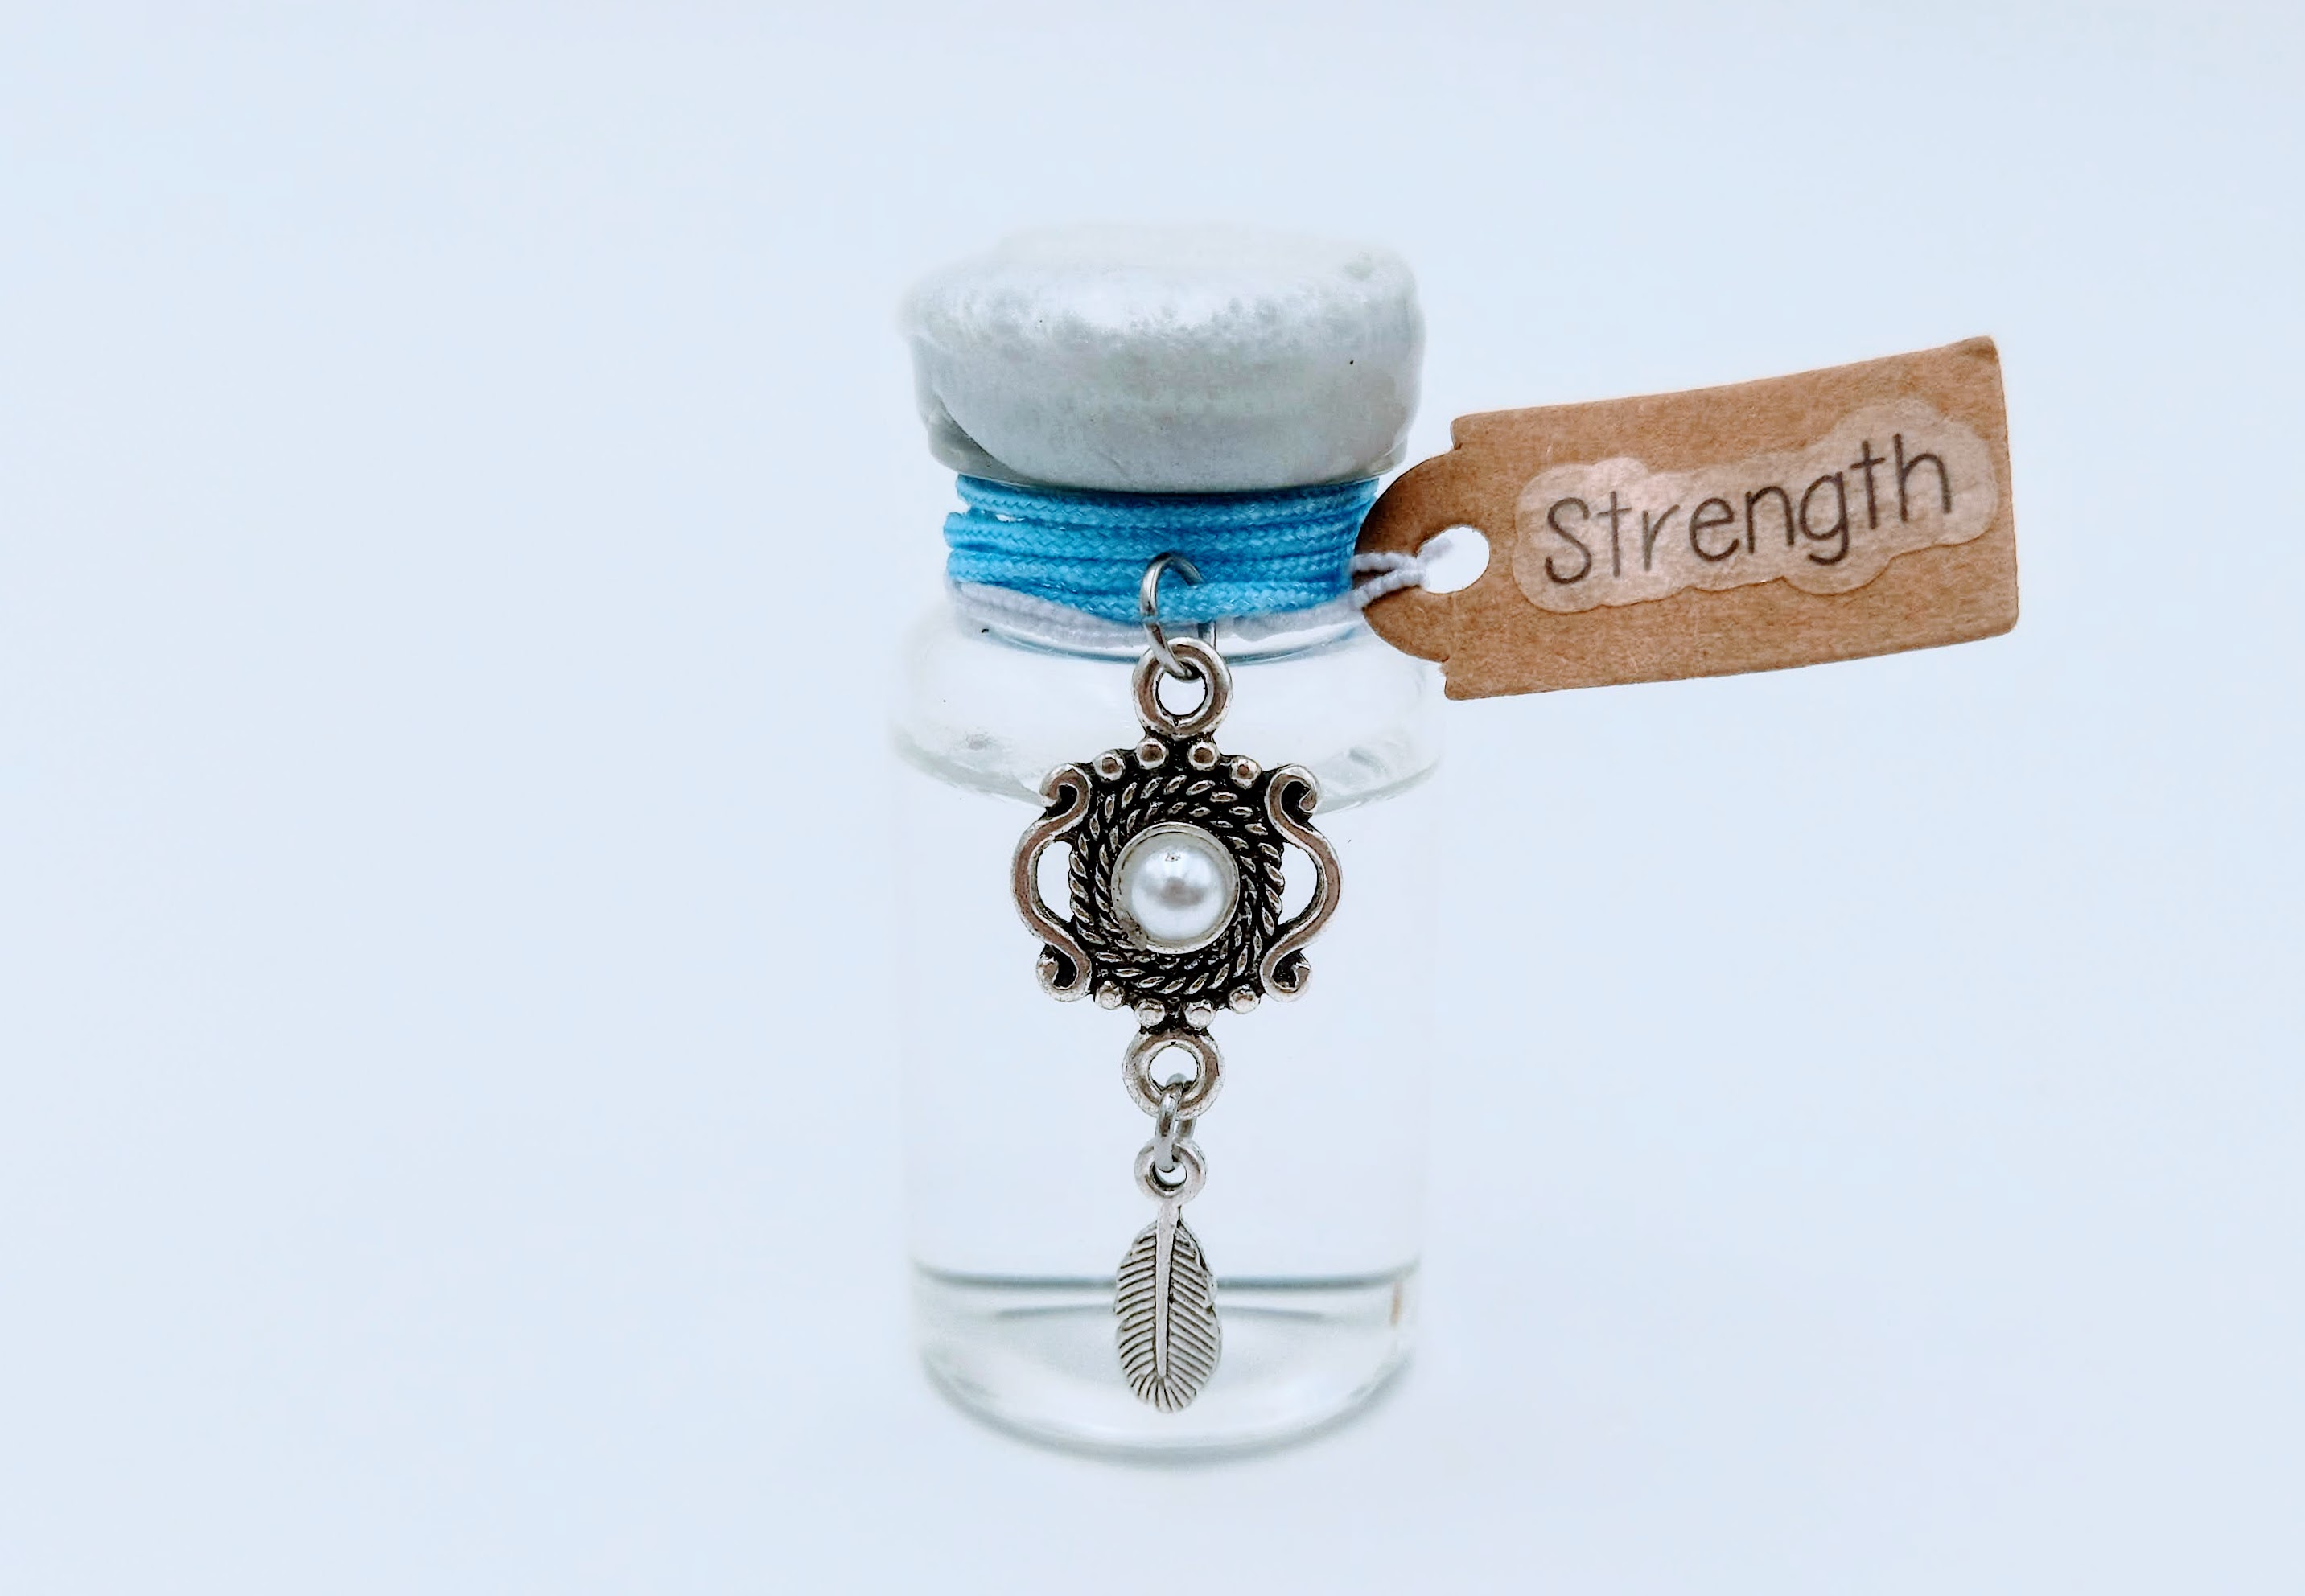 VIAL* Protection and Strength - Vial filled with St.Brigid Well Water from an Irish Holy Well.